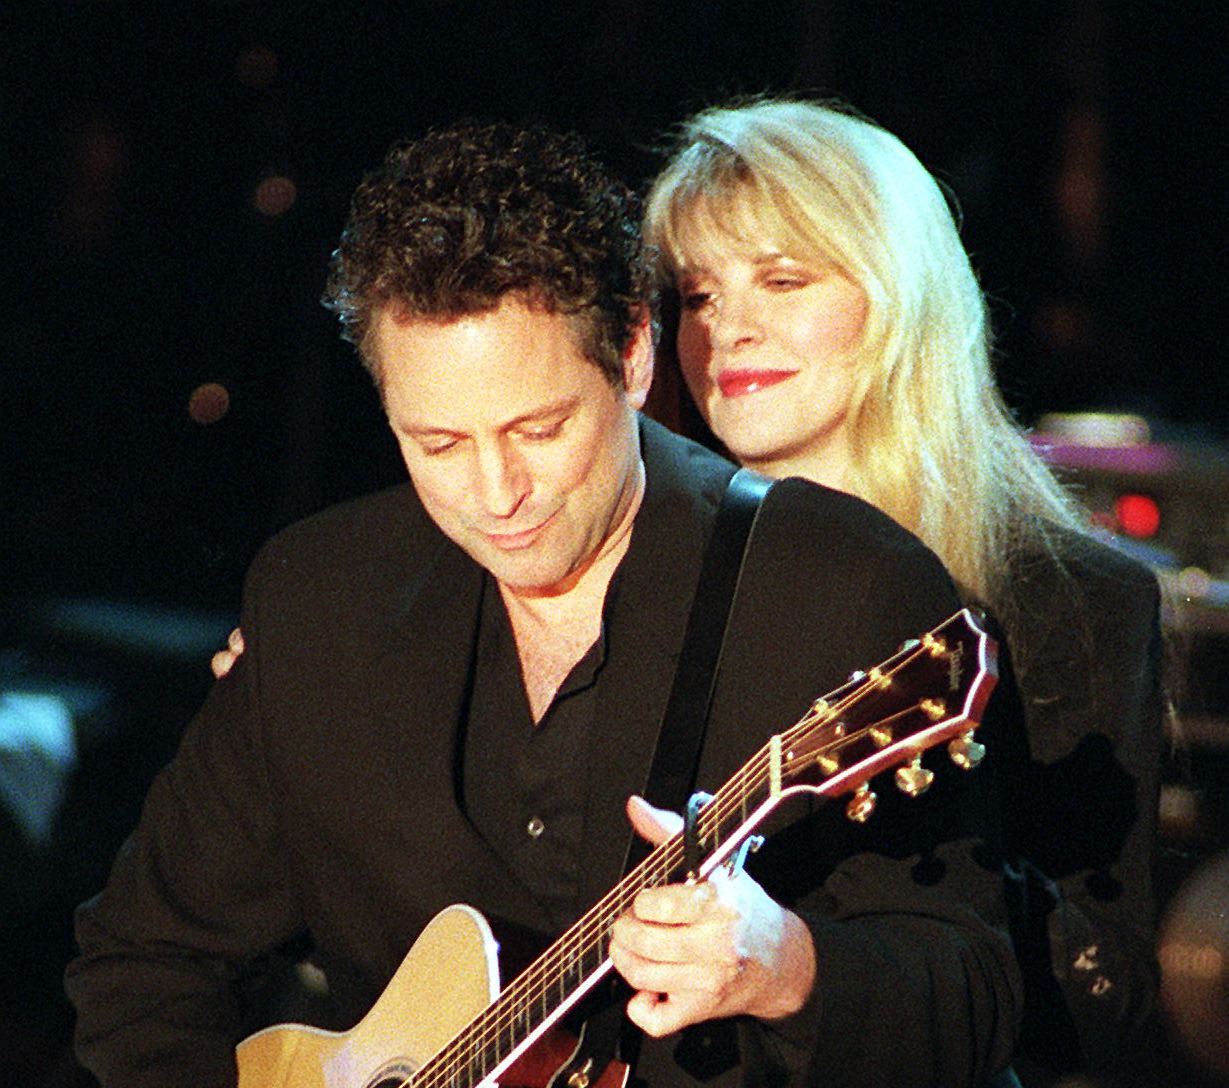 Stevie Nicks looks over Lindsey Buckingham's shoulder as he plays guitar during Fleetwood Mac's Rock & Roll Hall of Fame induction ceremony in 1998.